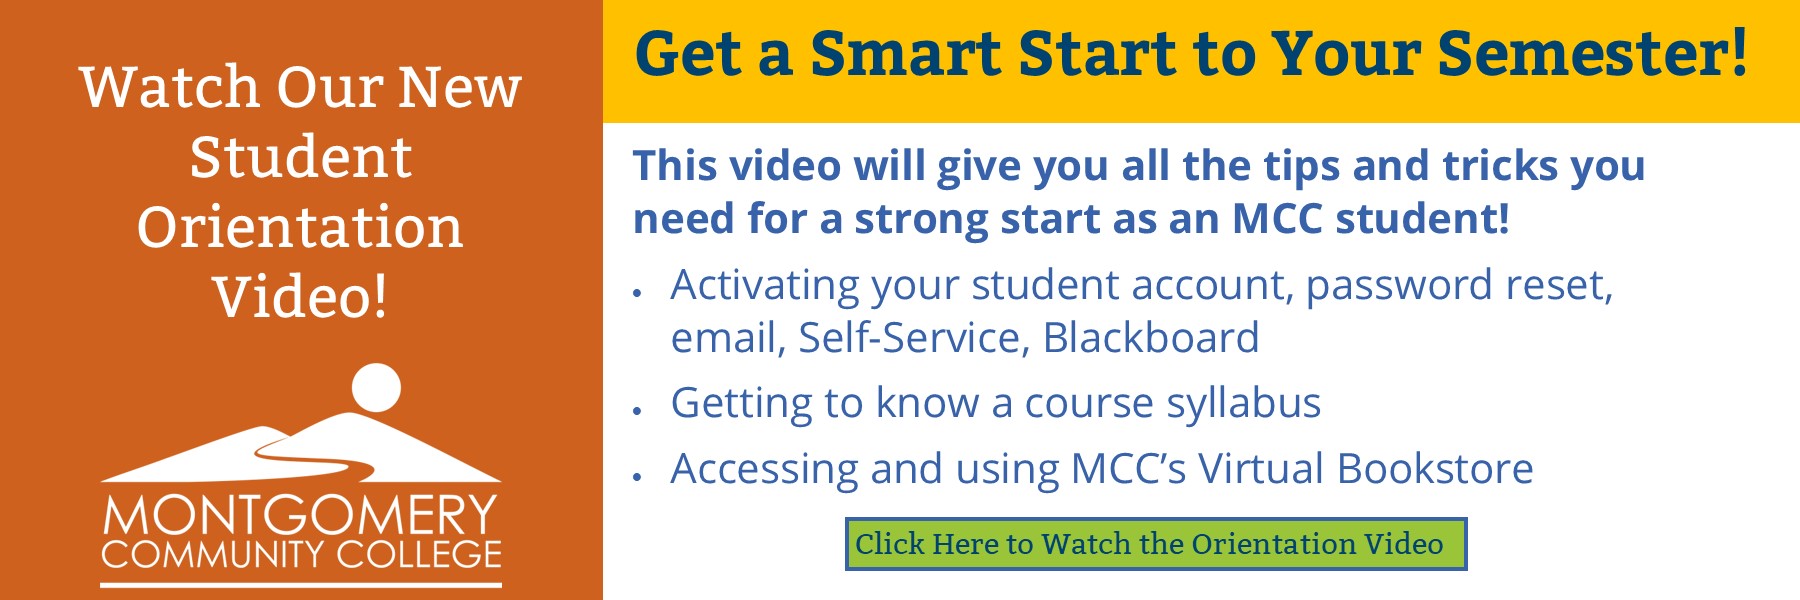 Watch our new student orientation video! Get a smart start to your semester! This video will give you all the tips and tricks you need for a strong start as an MCC student! Activating your student account, password reset, email, self-service, blackboard, getting to know a course syllabus, accessing and using MCC's virtual bookstore. click here to watch the orientation video.